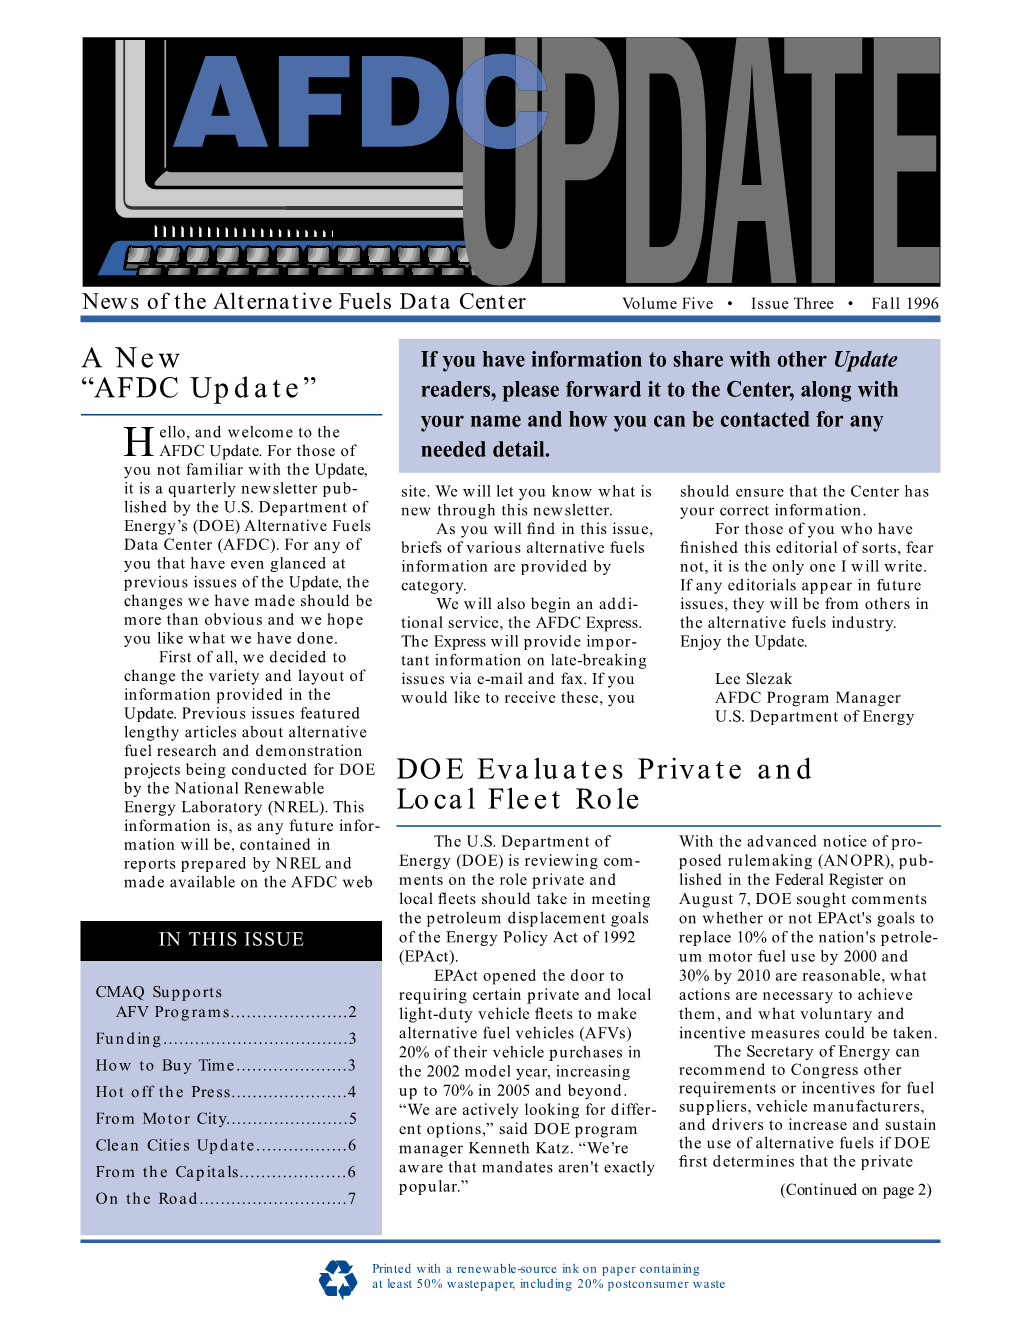 DOE Evaluates Private and Local Fleet Role a New “AFDC Update”